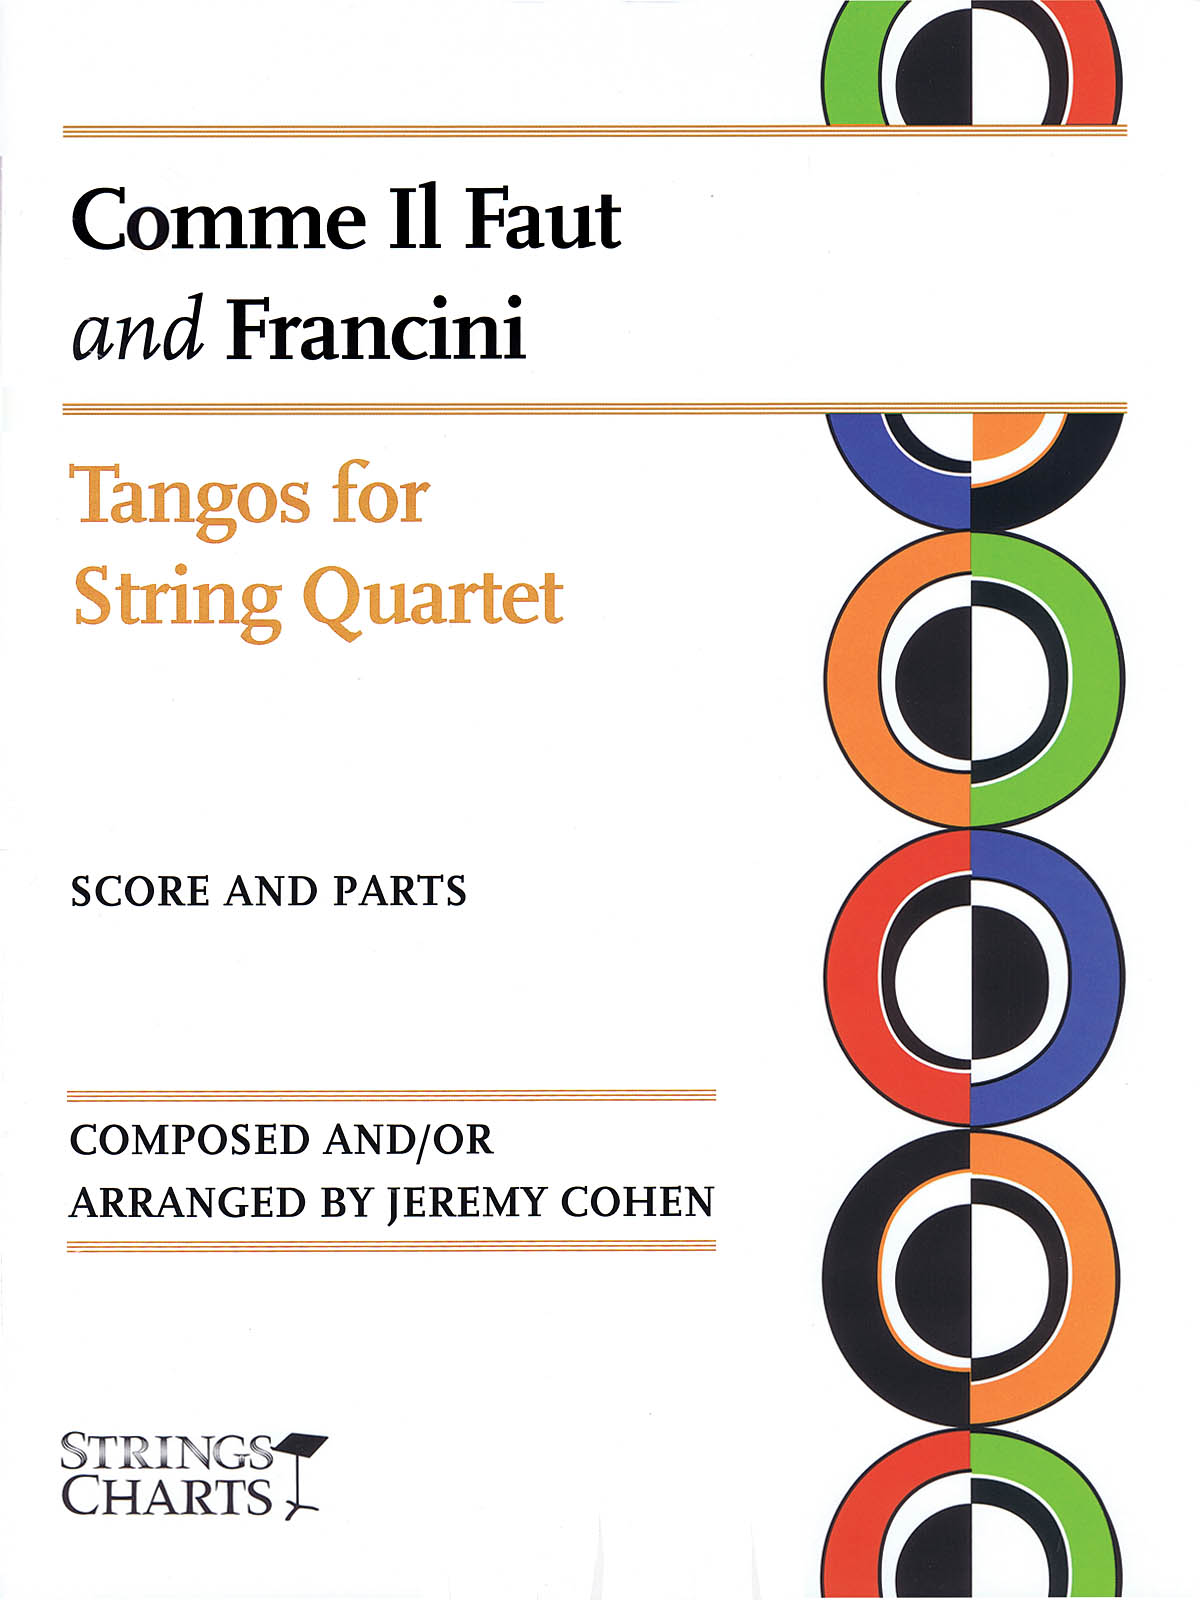 Comme Il Faut and Francini(Tangos fuer String Quartet Strings Charts Series)